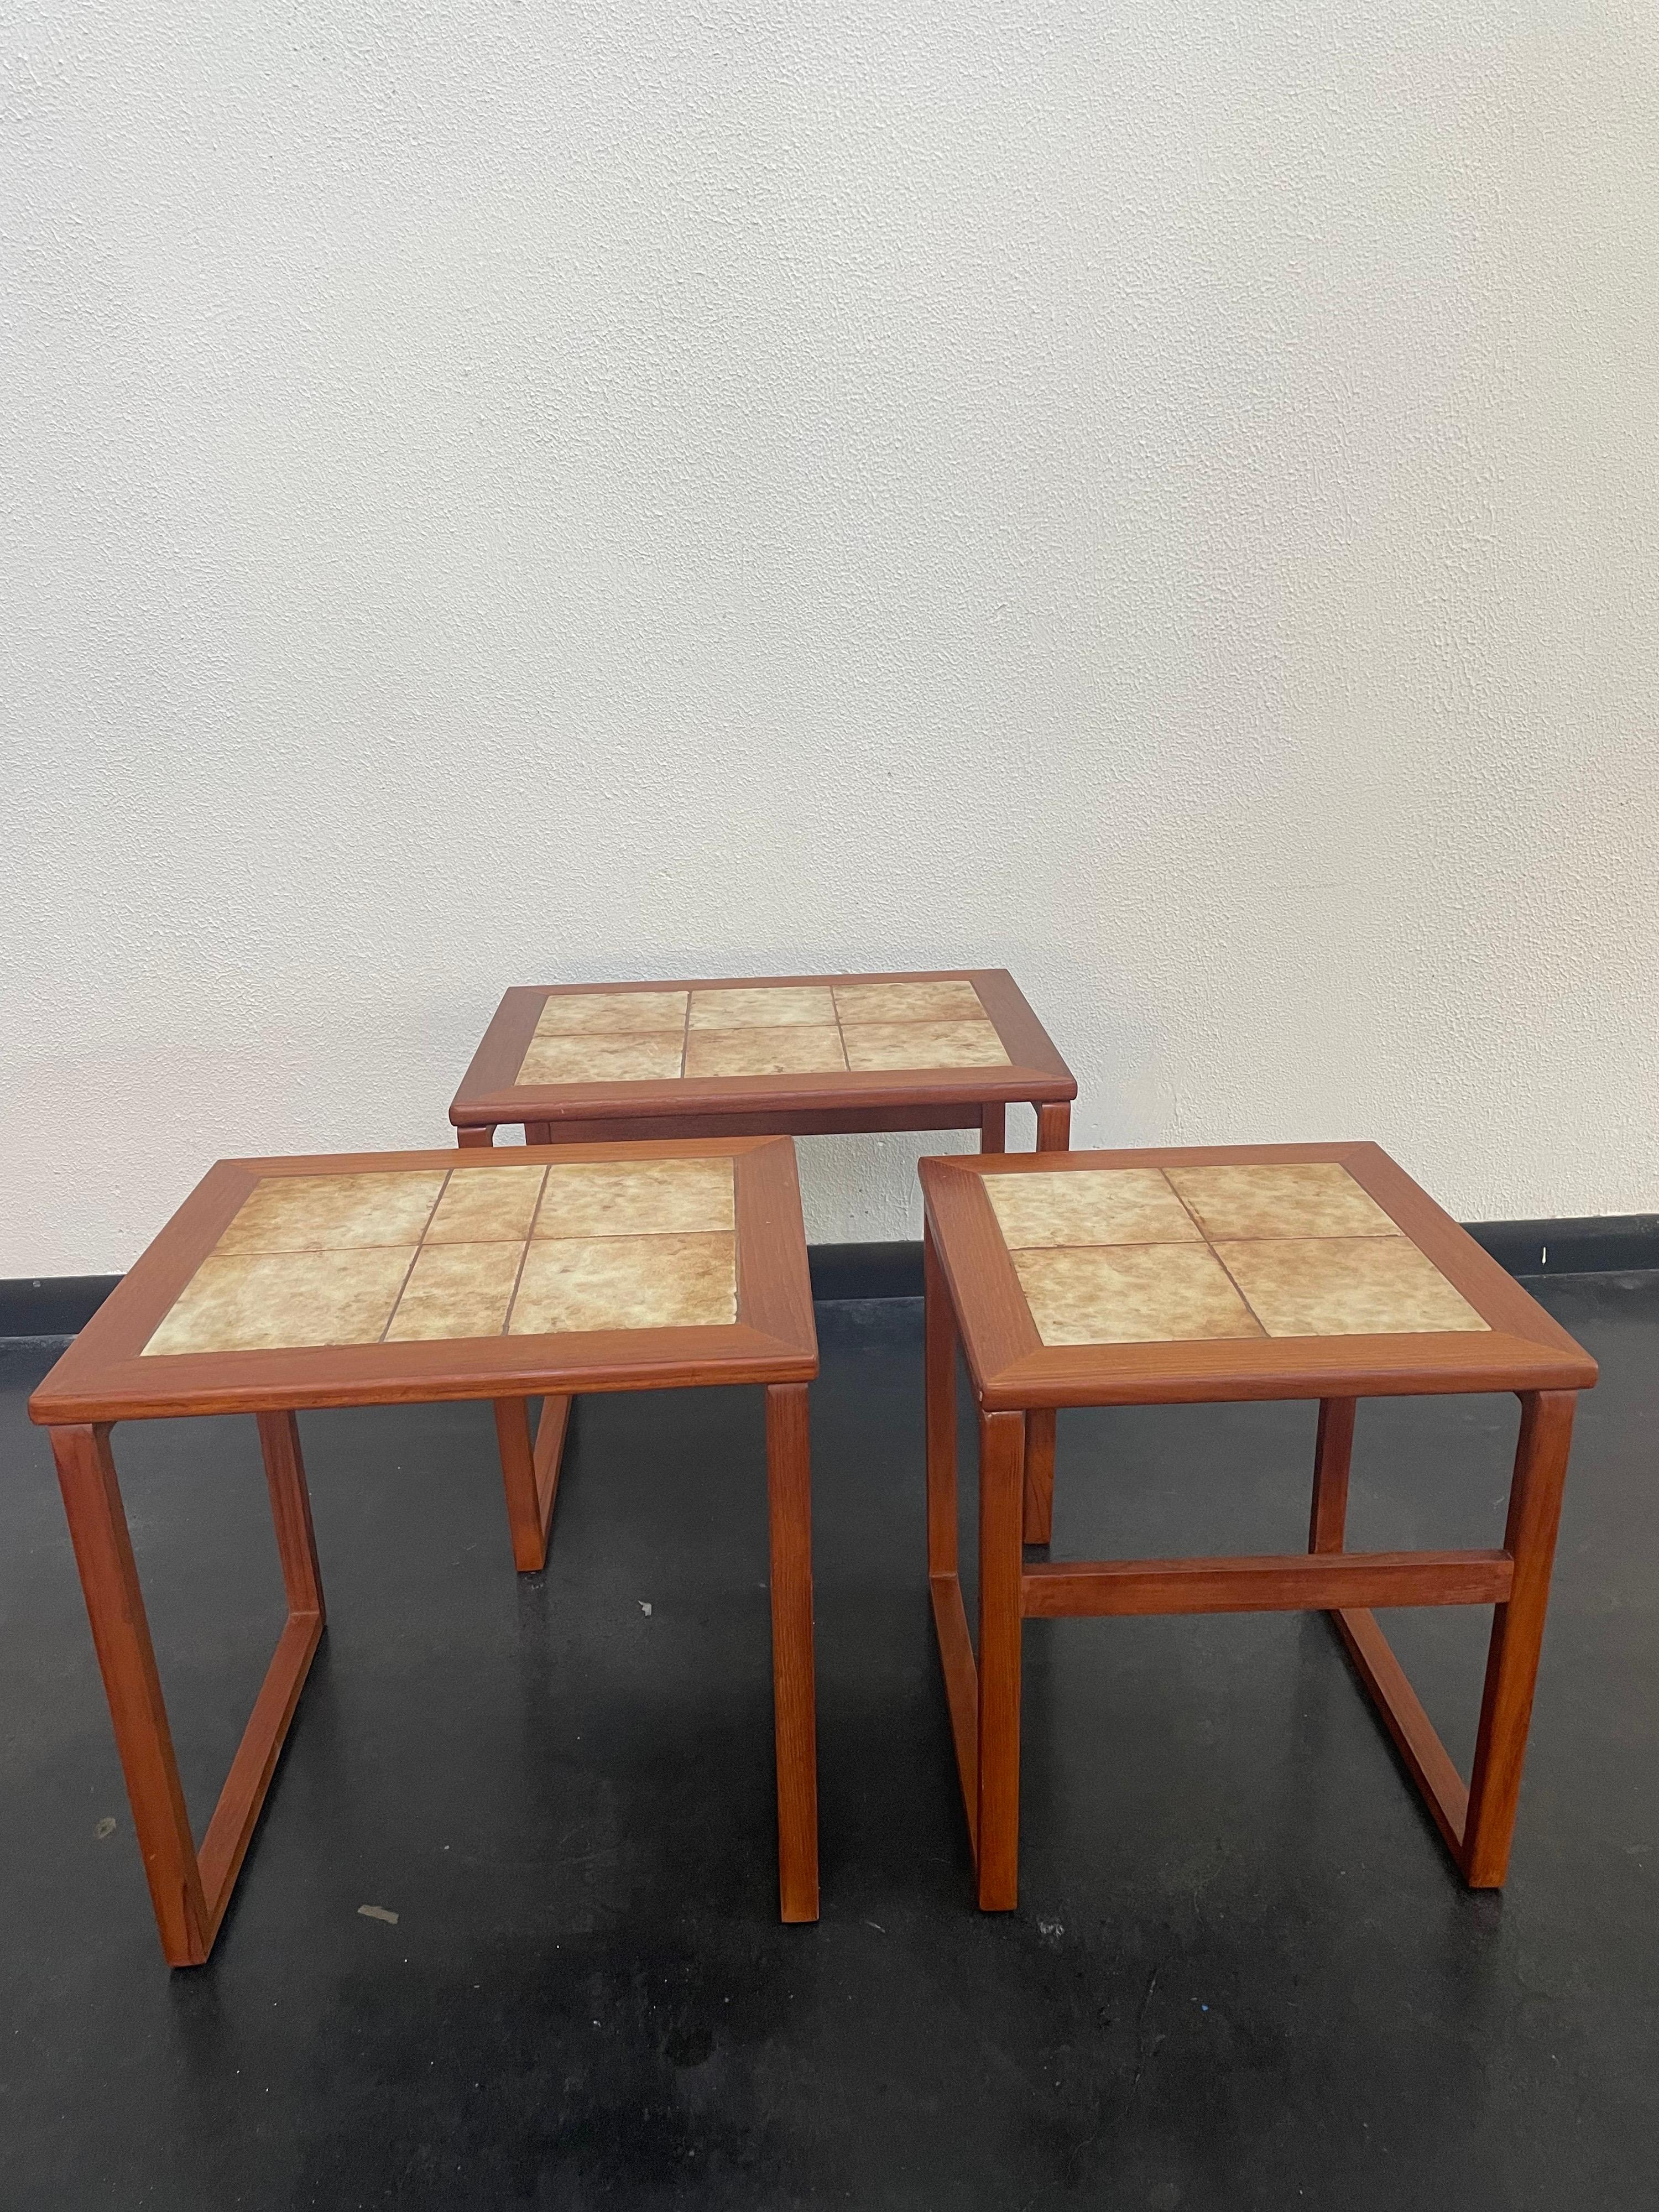 1960s Mid-Century Modern Danish nesting tables with ceramic tile top.